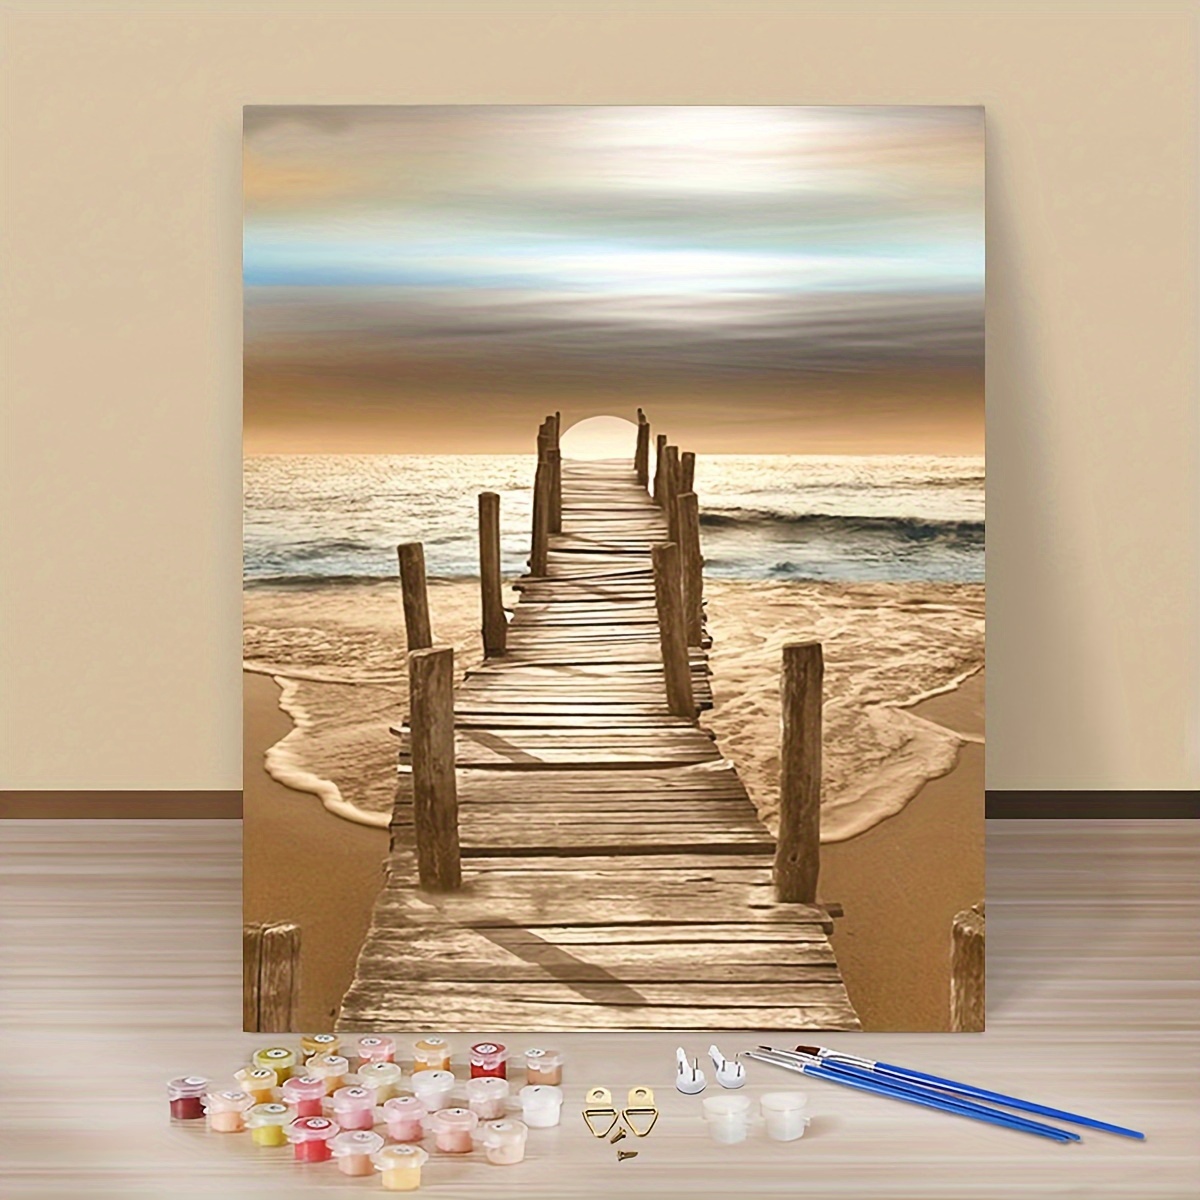 

1pc Diy Paint By Numbers Kit, Beach Wooden Bridge Scenery, 16x20 Inch Canvas, Art Painting Set For Home Wall Decor